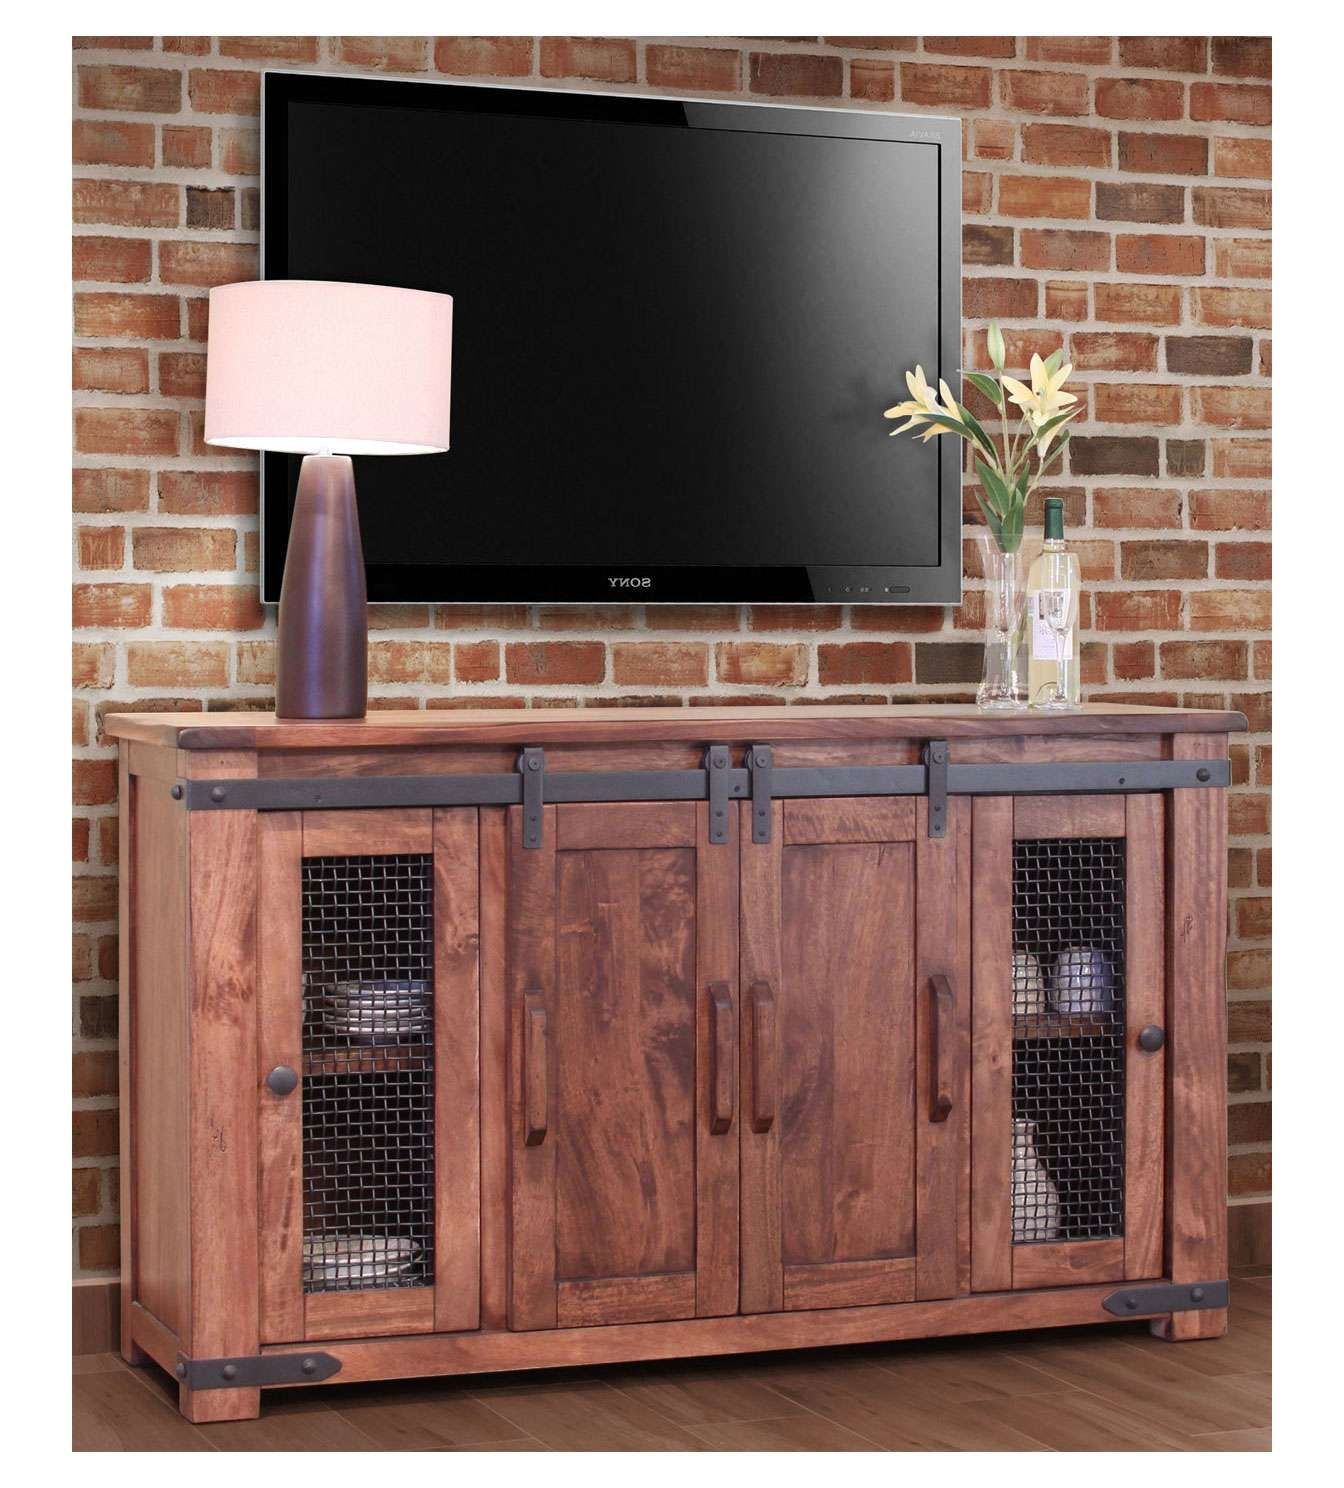 Radiant Image Also Cherry Wood Tv Stand Cherry Wood Tv Stand Home With Rustic 60 Inch Tv Stands (View 1 of 15)